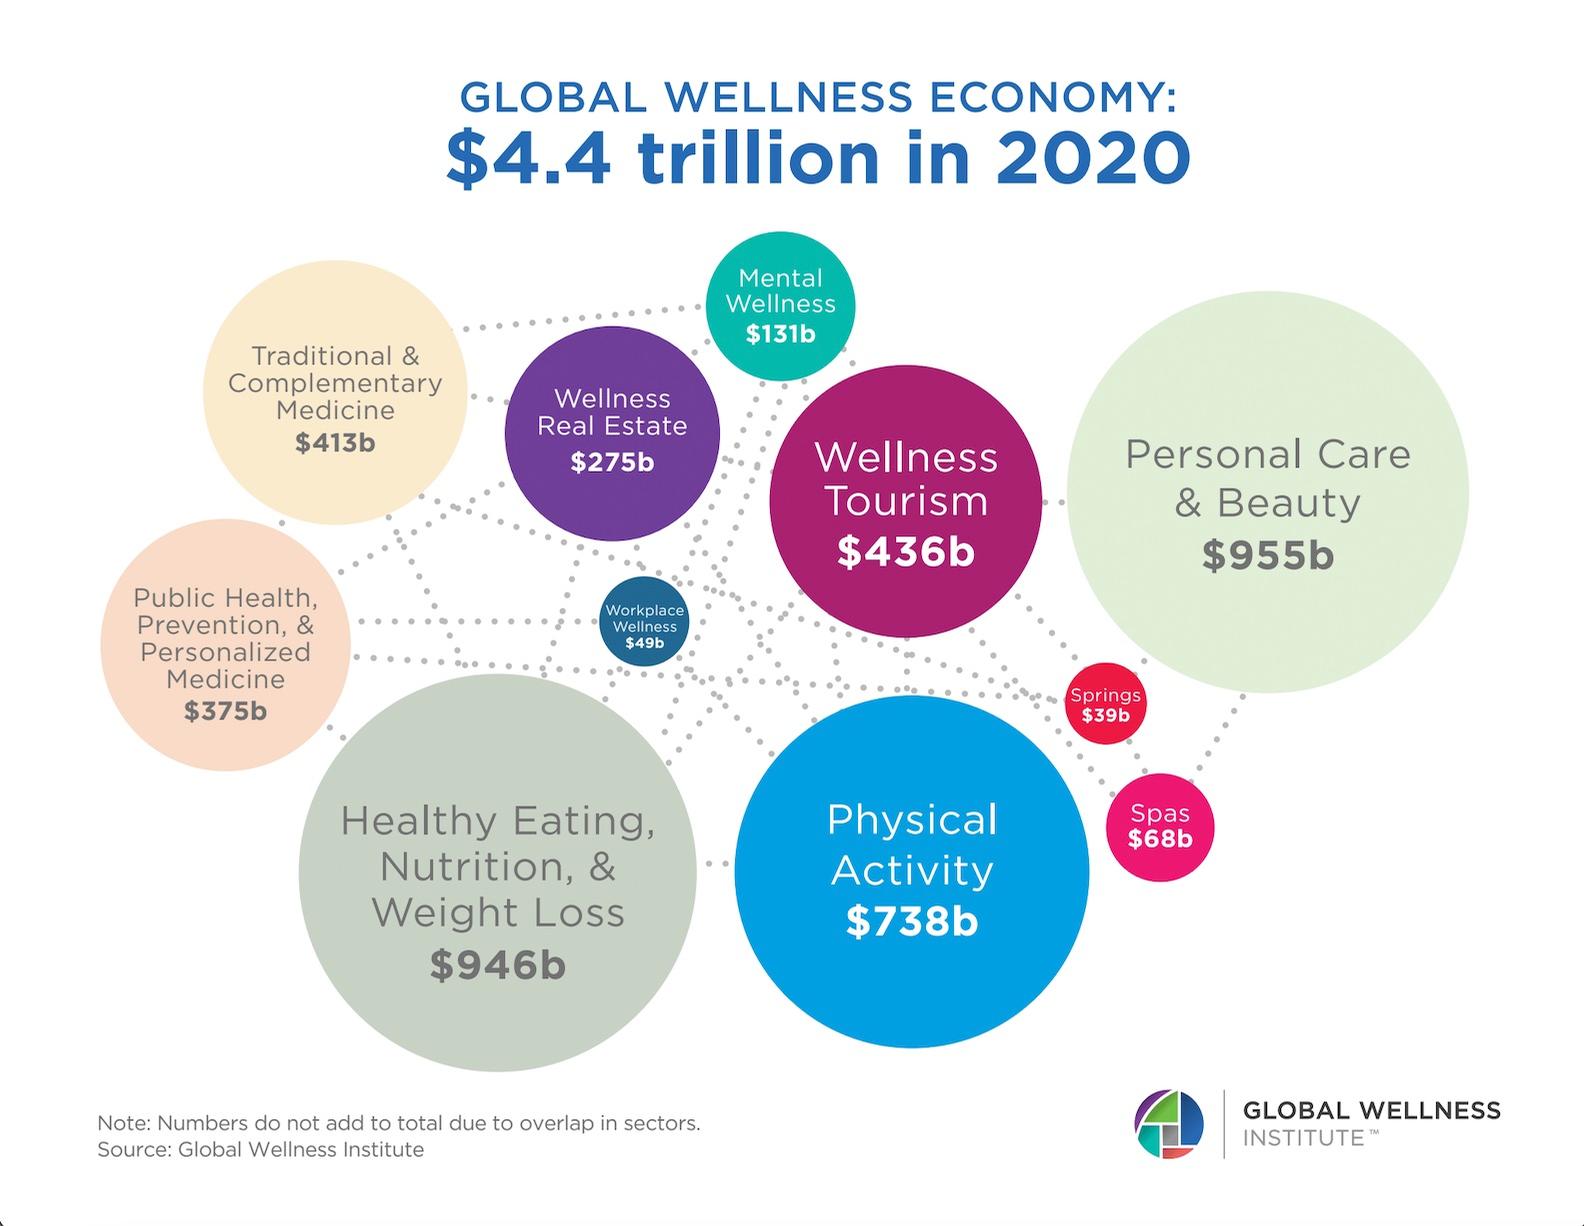 The report provides new market data for the wellness economy and splits the sector into the 11 categories above